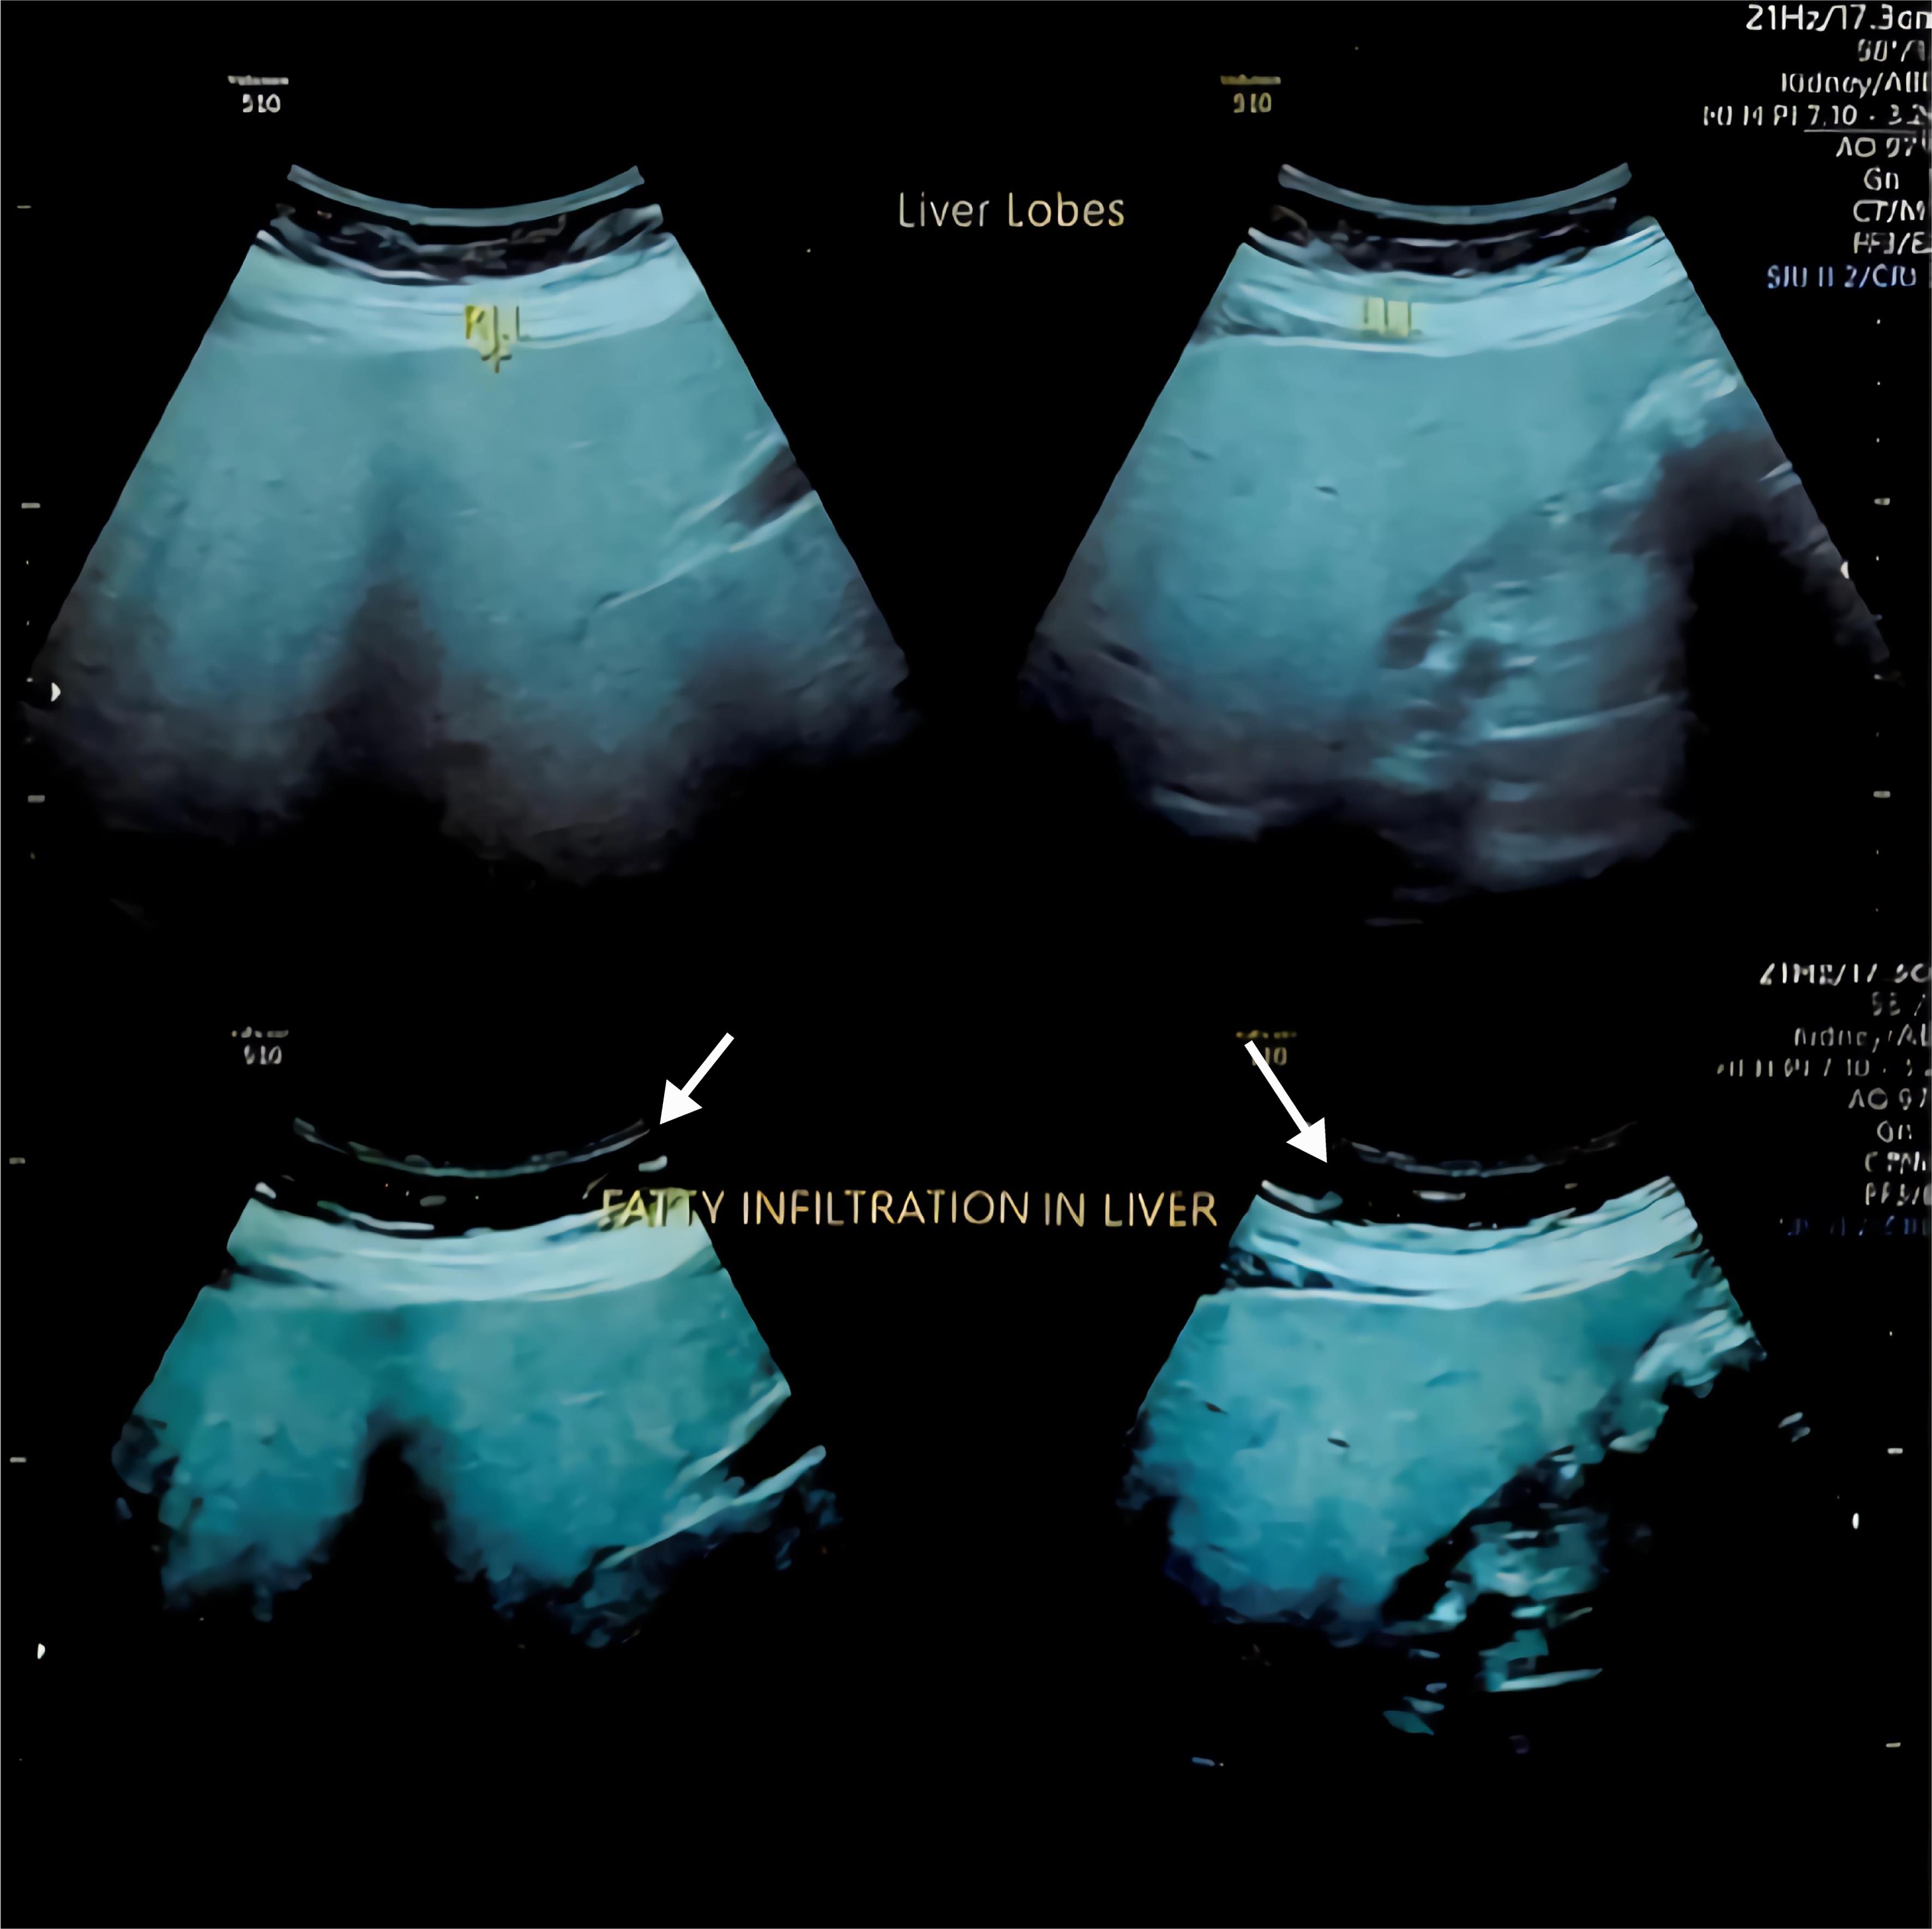 Ultrasound showing fatty infiltration in the liver.